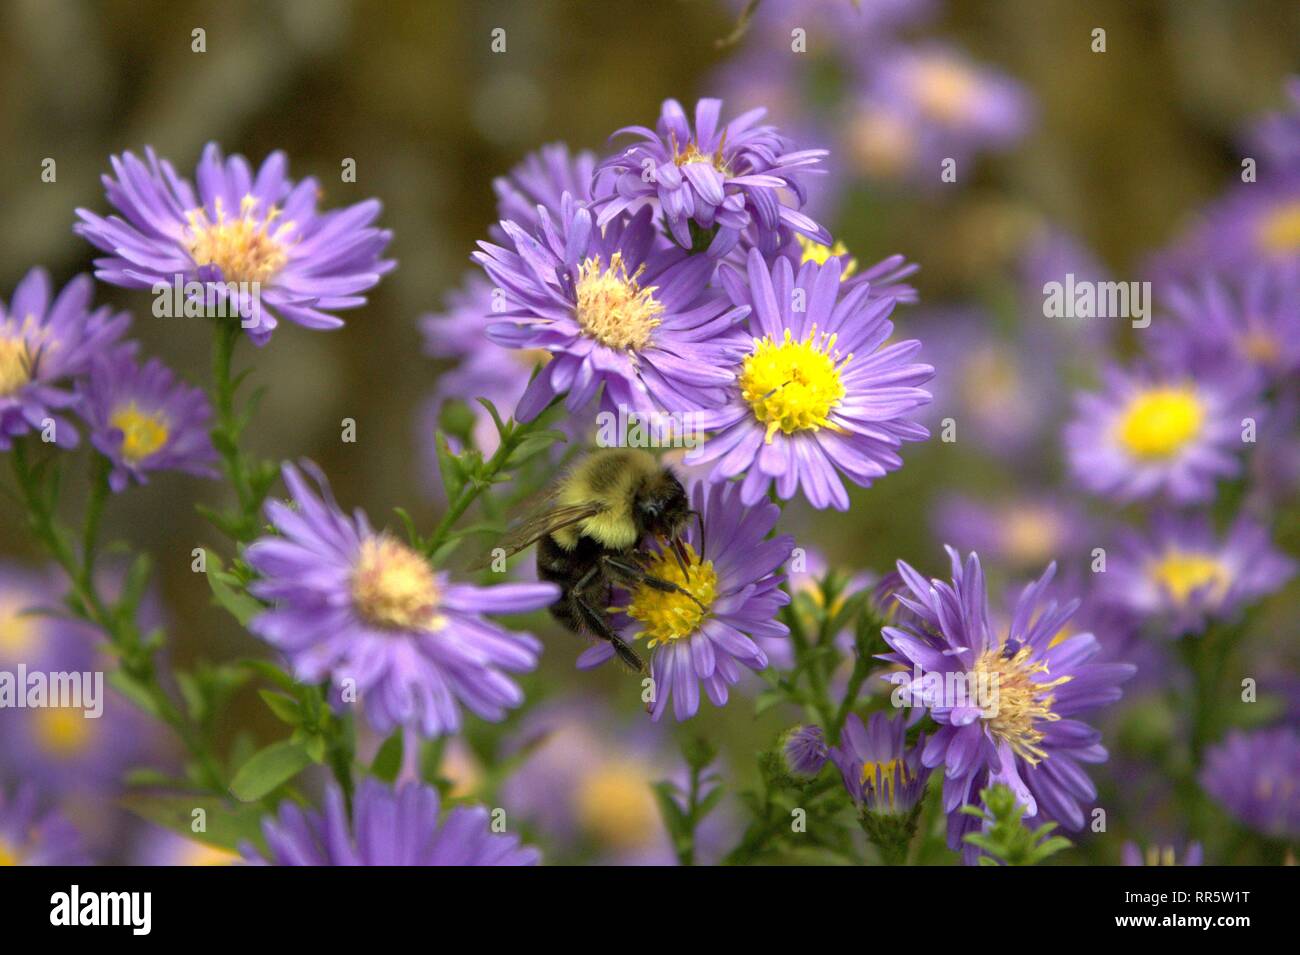 A Bumblebee Collects Pollen And Nectar From Purple Asters Stock Photo